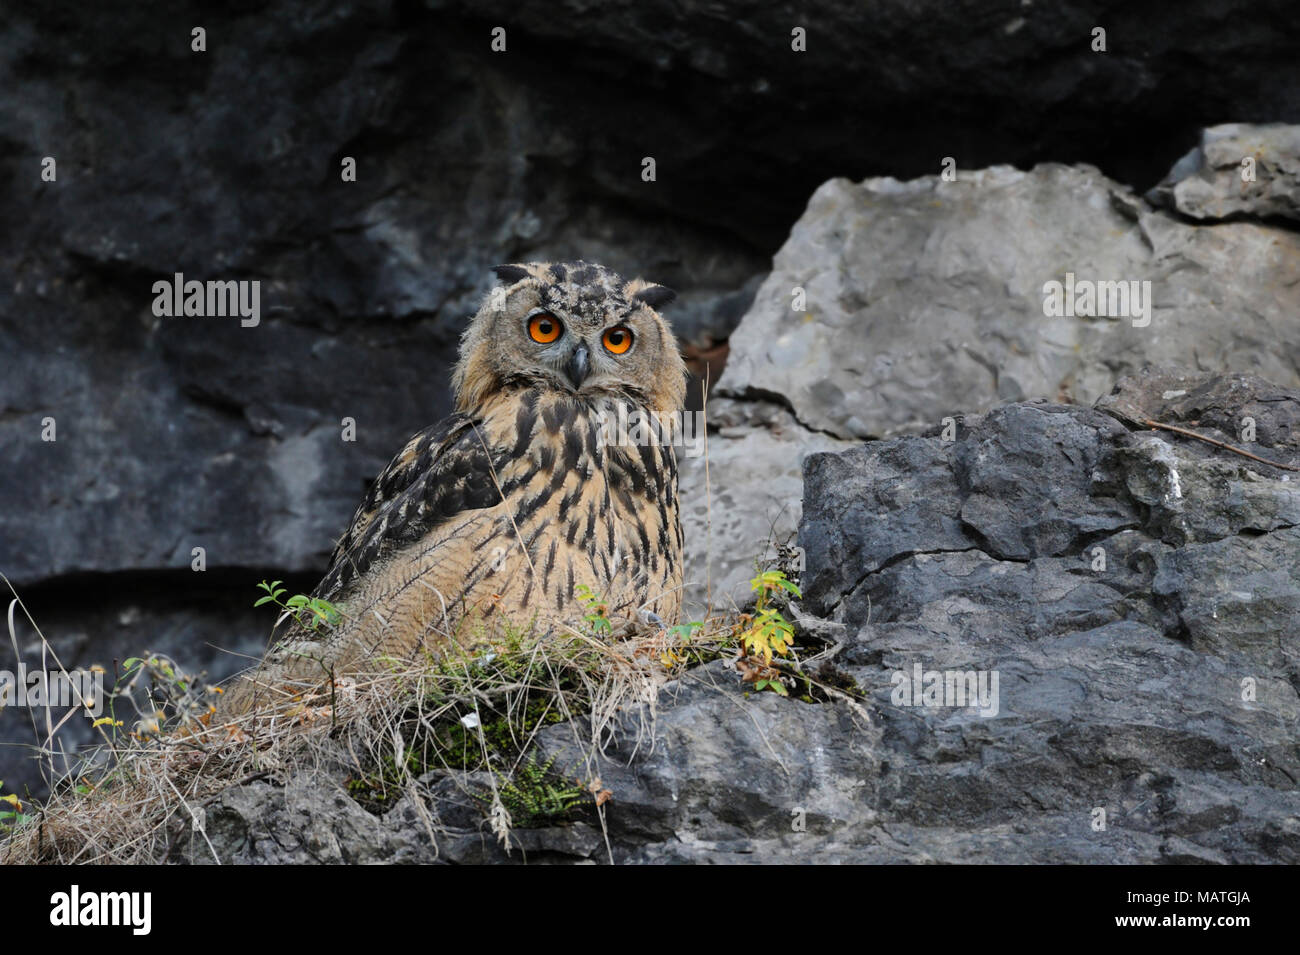 Eagle Owl / Uhu ( Bubo bubo ), juvenile bird, sitting in the slope of an old quarry, watching attentively, looks funny, wildlife, Europe. Stock Photo